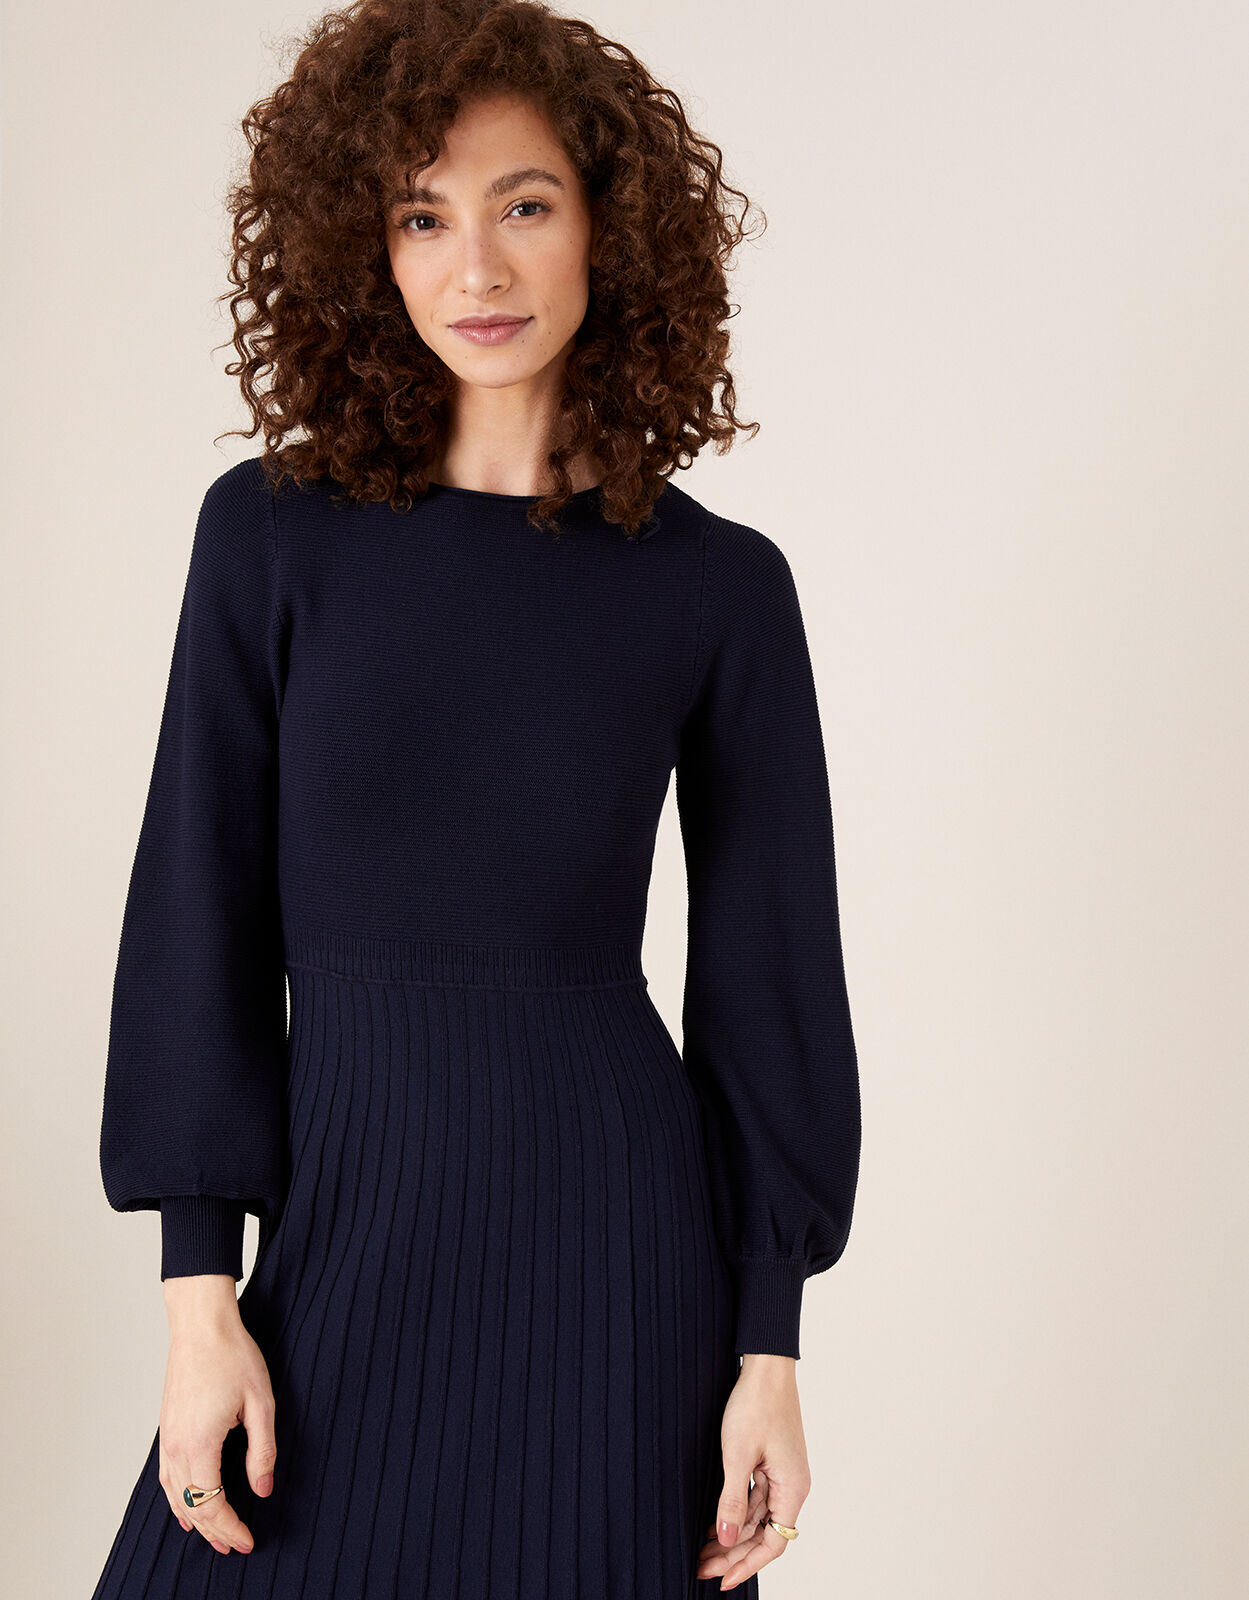 Pleated Knit Dress with LENZING ...